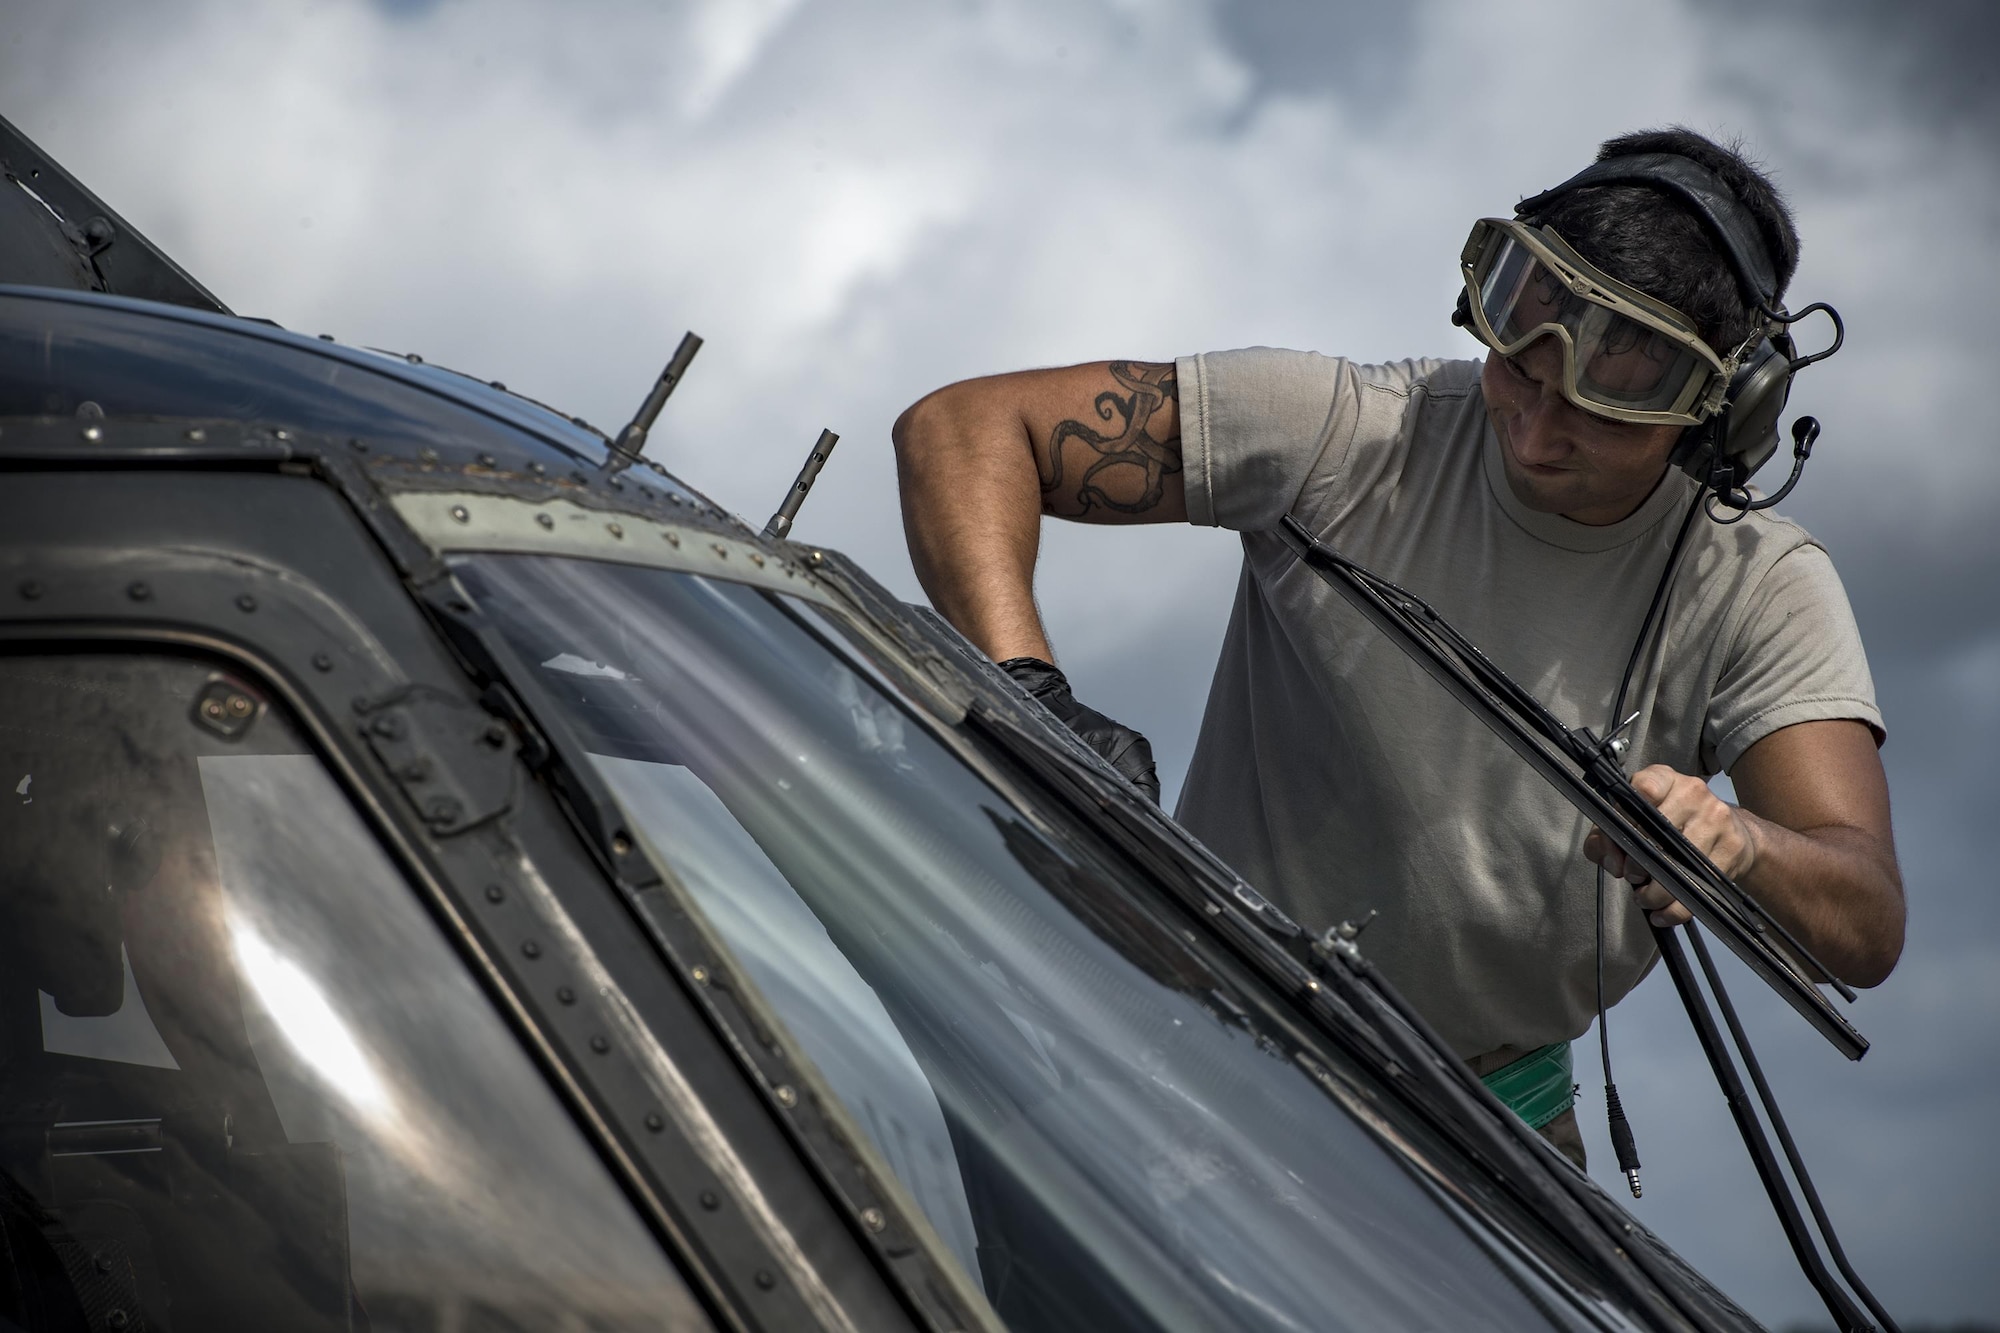 A maintainer from the 41st Helicopter Maintenance Unit washes a window on an HH-60G Pave Hawk, Aug. 8, 2017, at Tyndall Air Force Base, Fla.